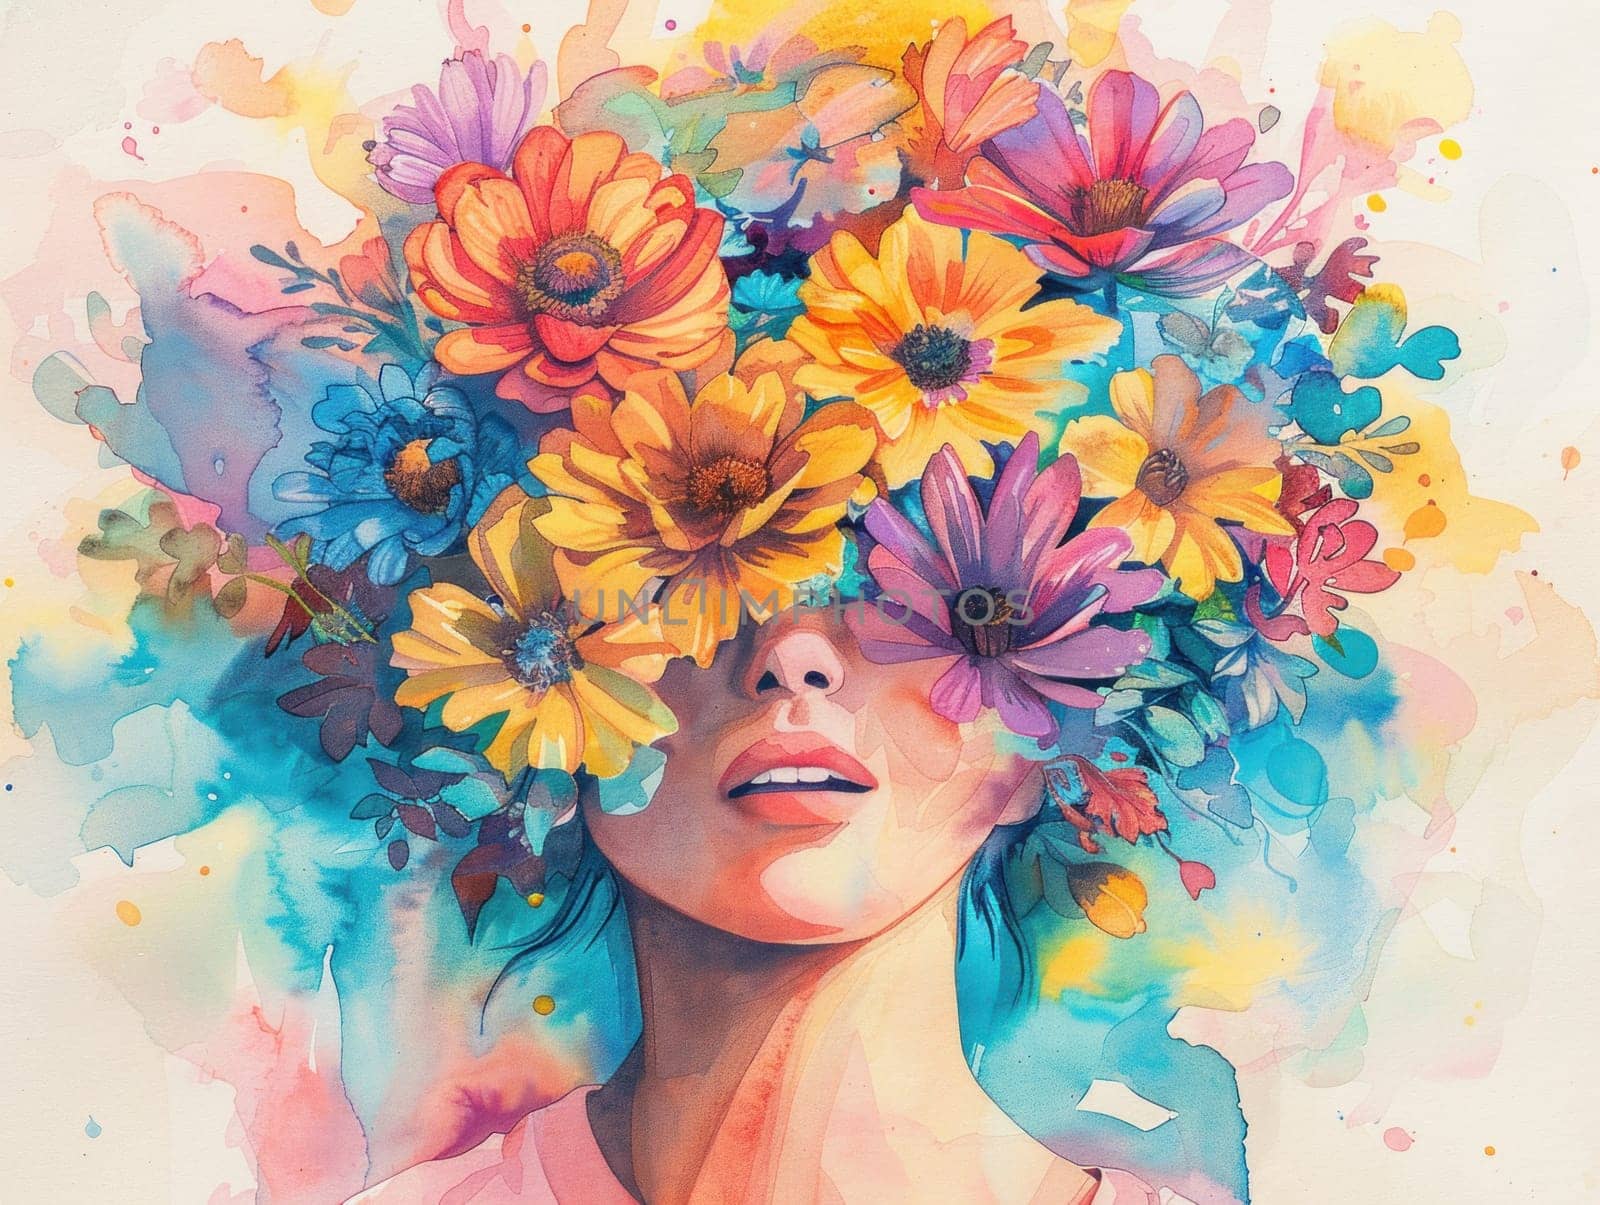 Woman adorned with flowers in artistic portrait symbolizing beauty and nature's elegance